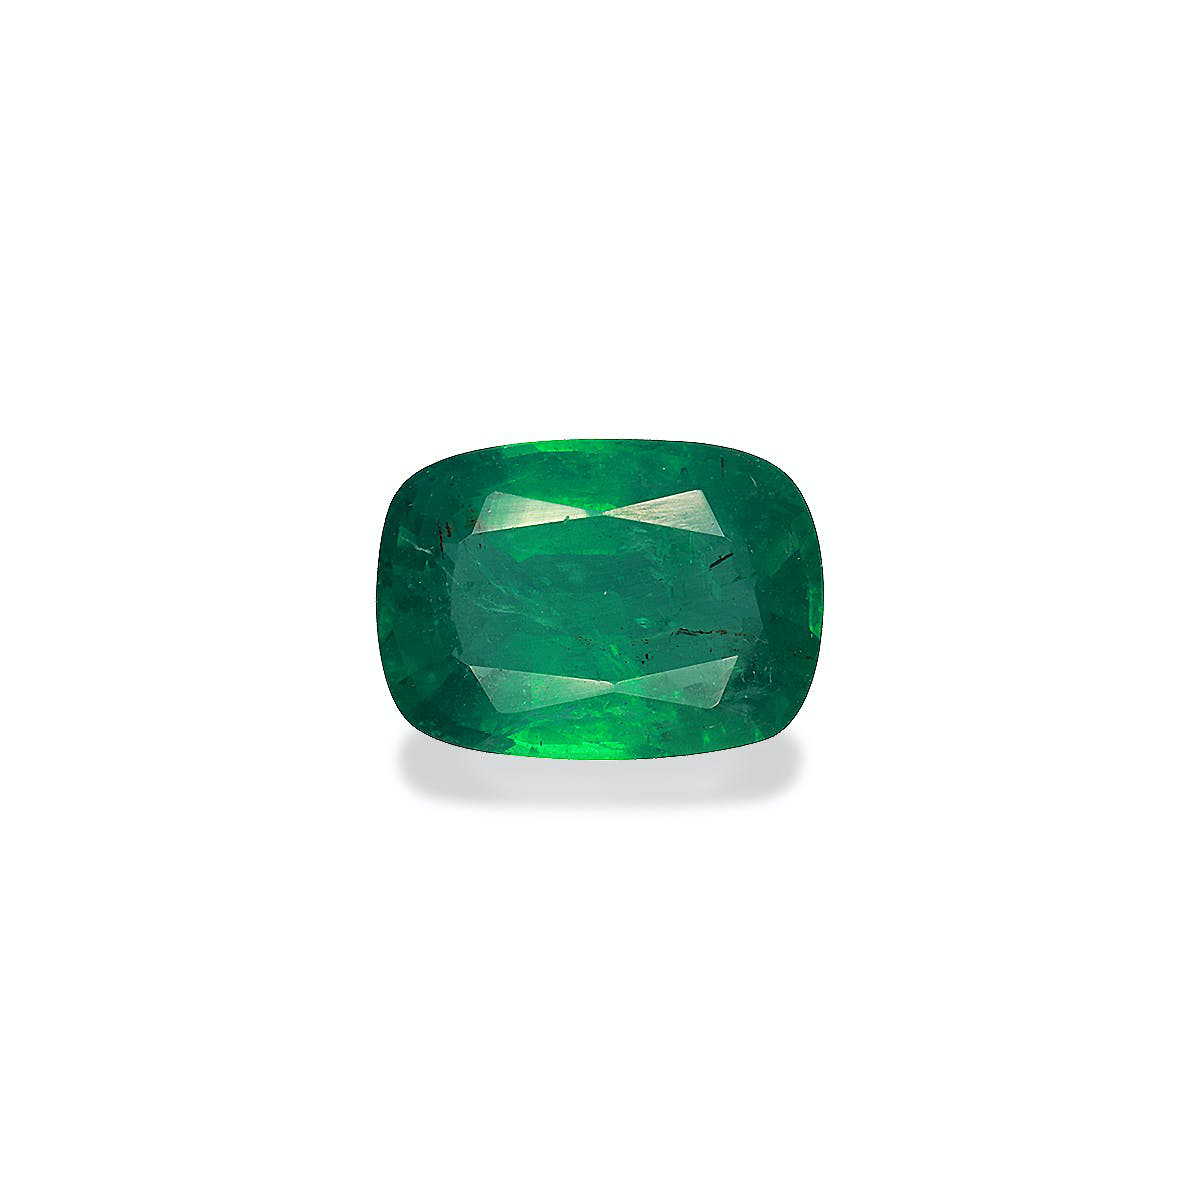 Picture of Green Zambian Emerald 3.56ct (PG0041)